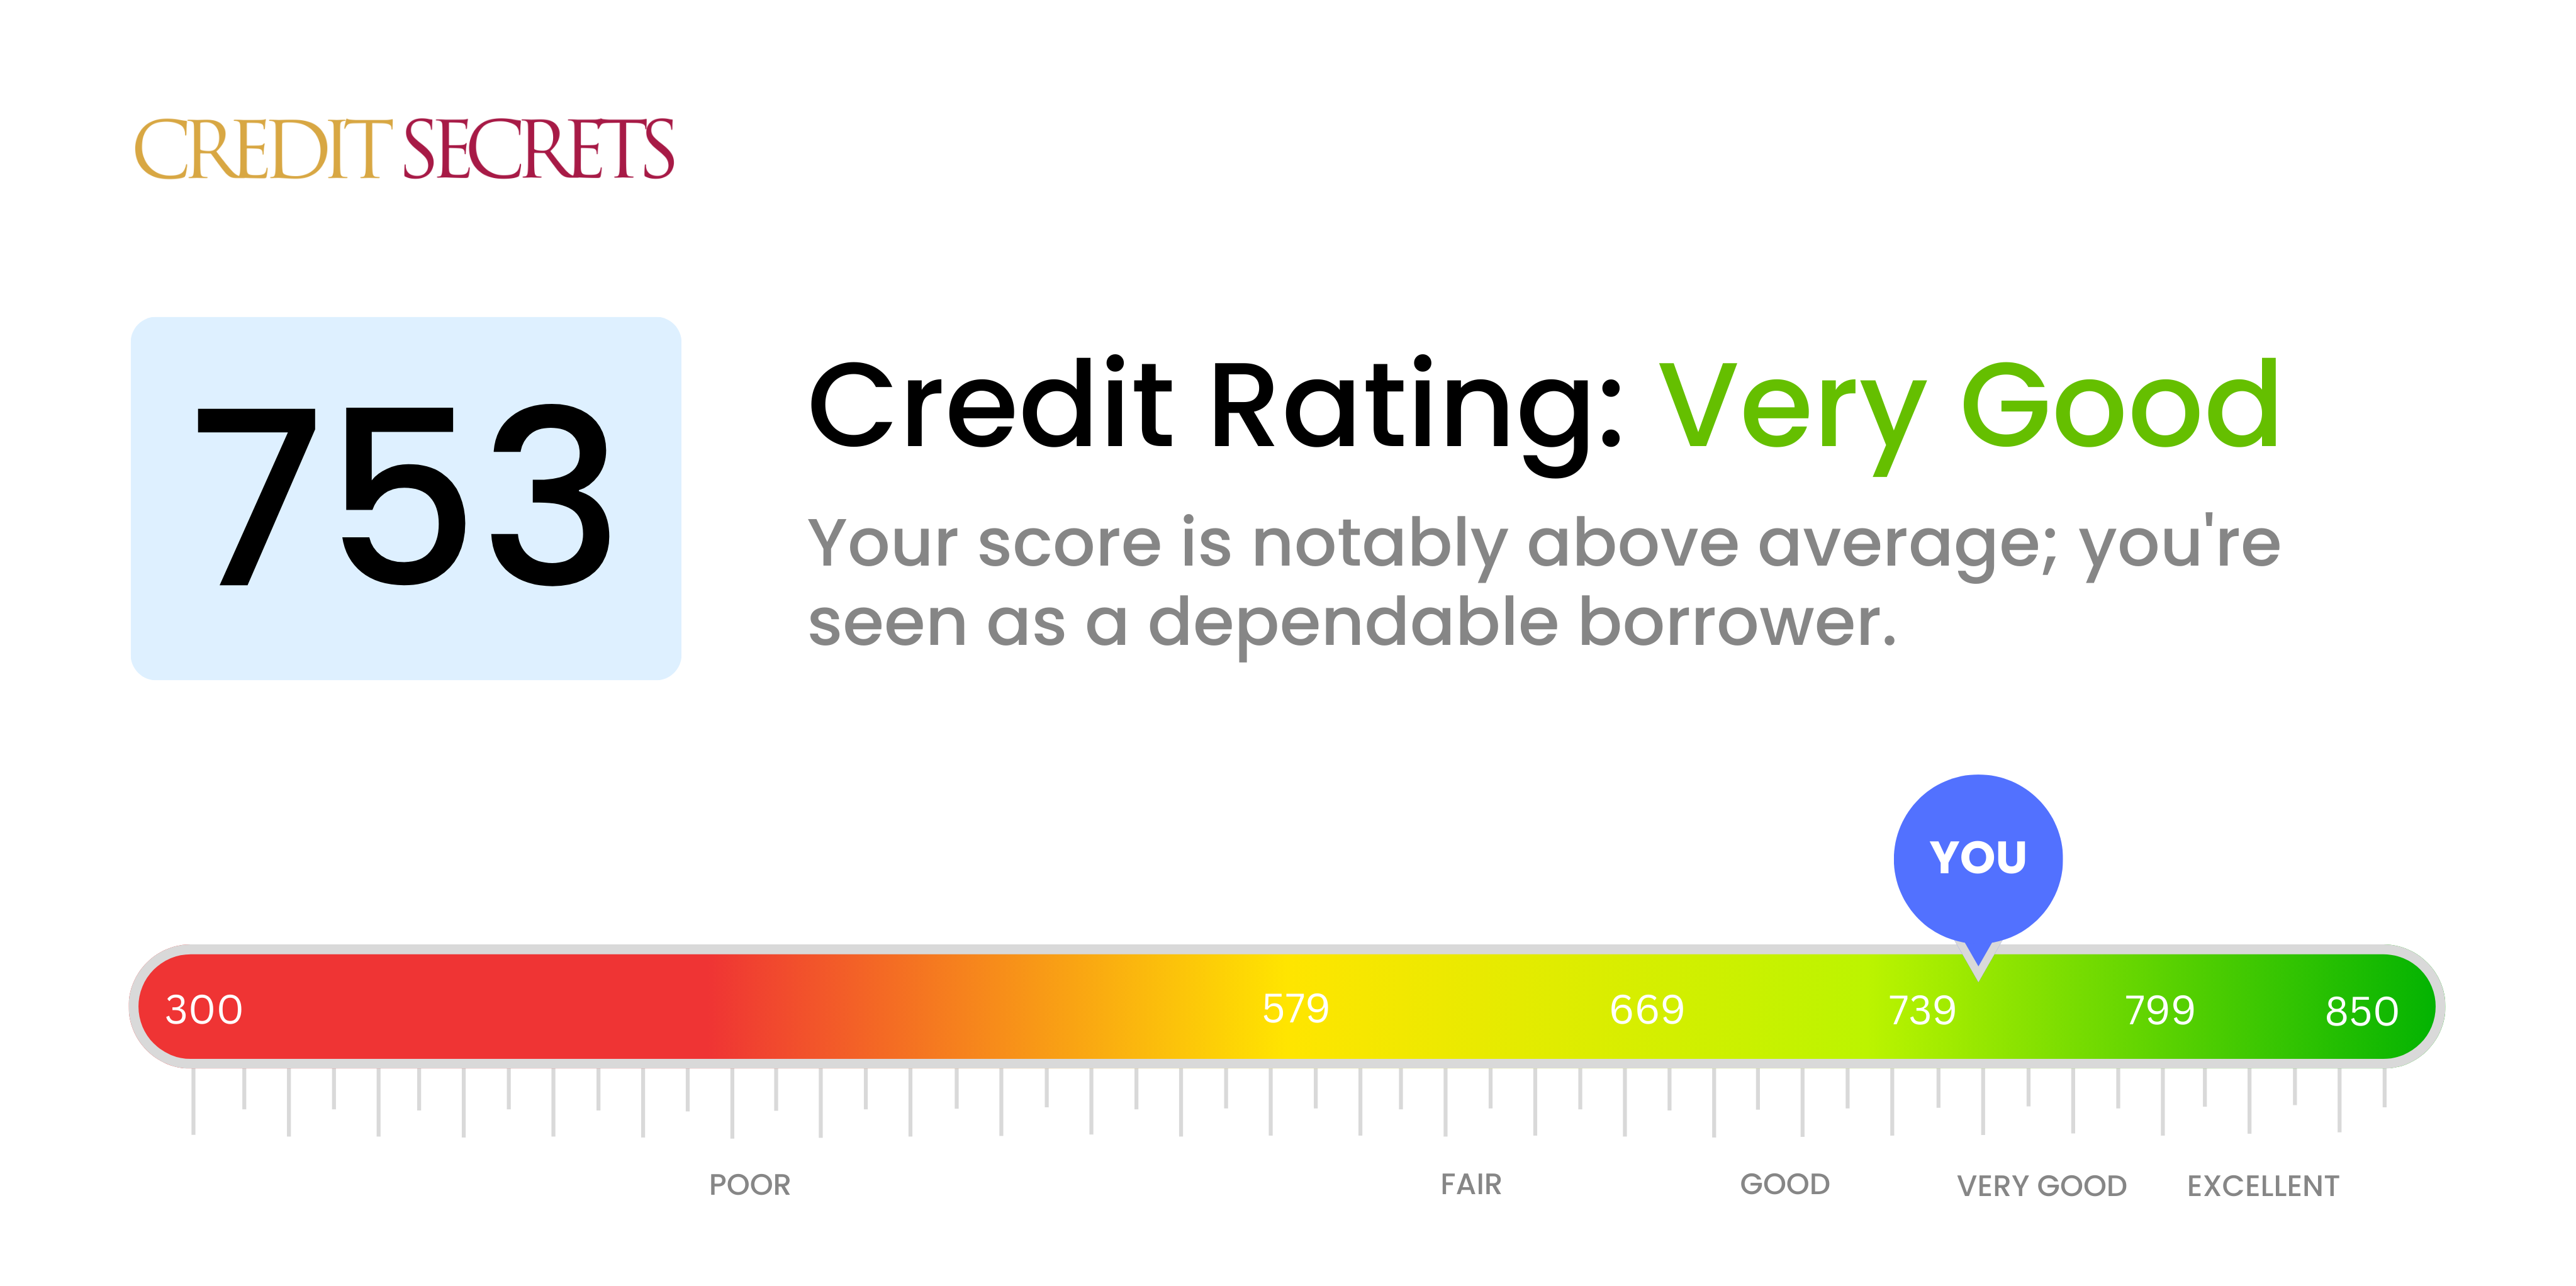 Is 753 a good credit score?